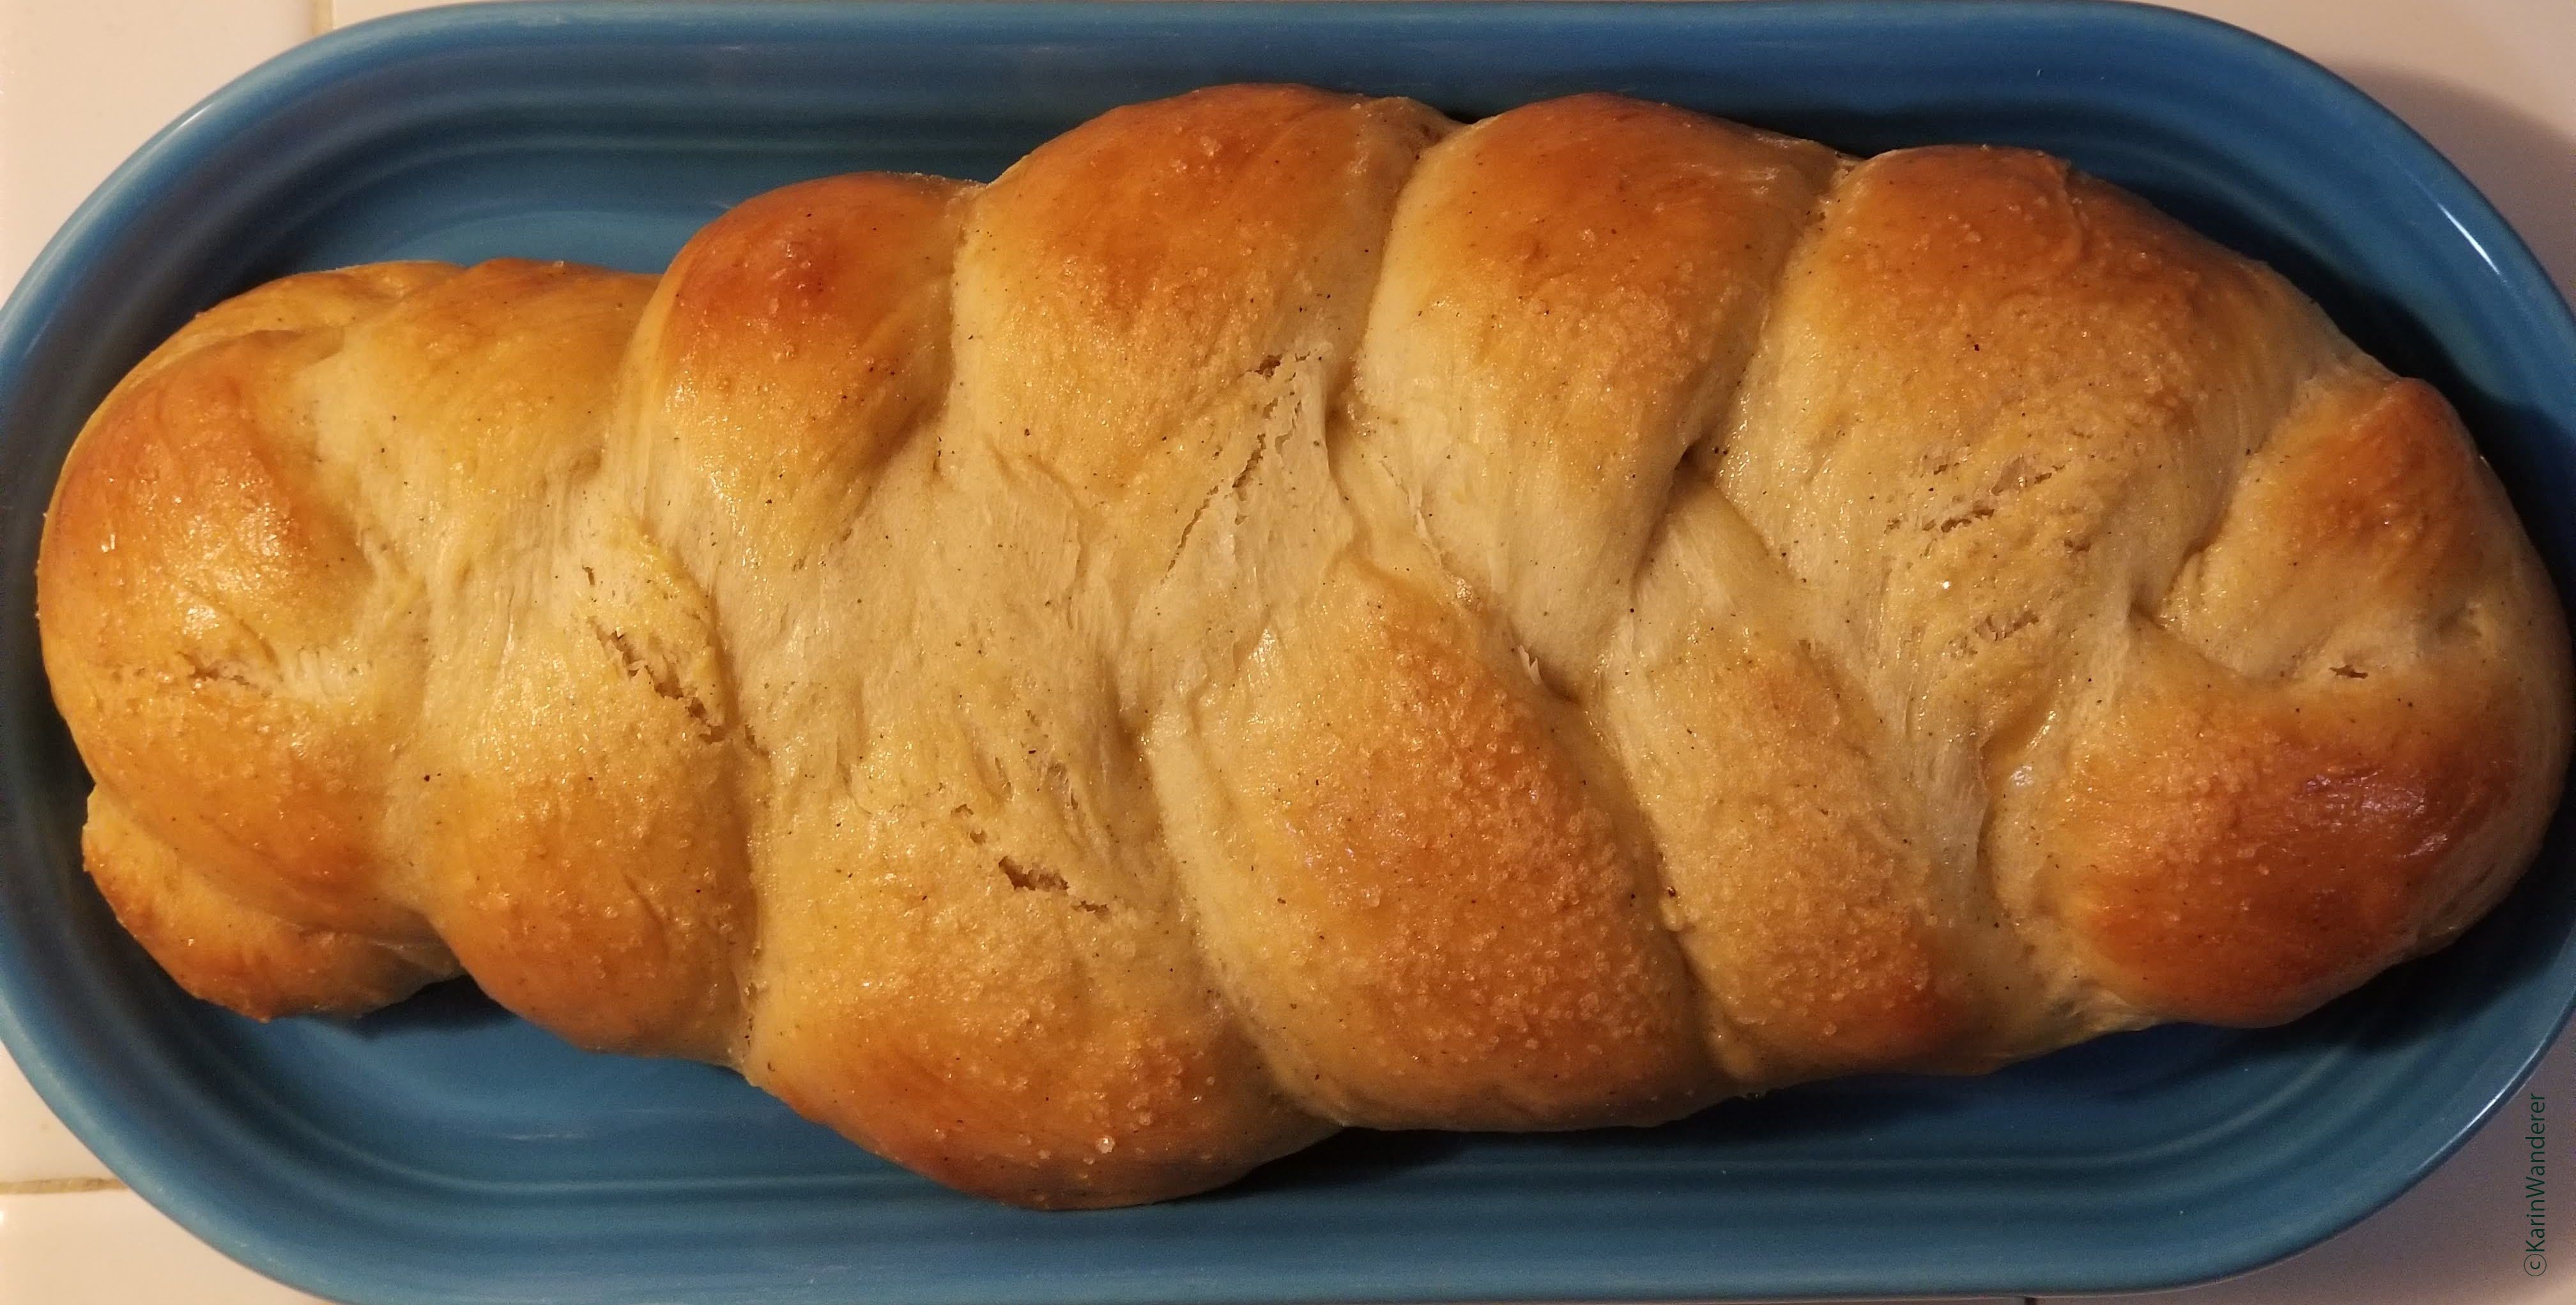 Braided loaf of bulle baked golden brown & ready to eat.